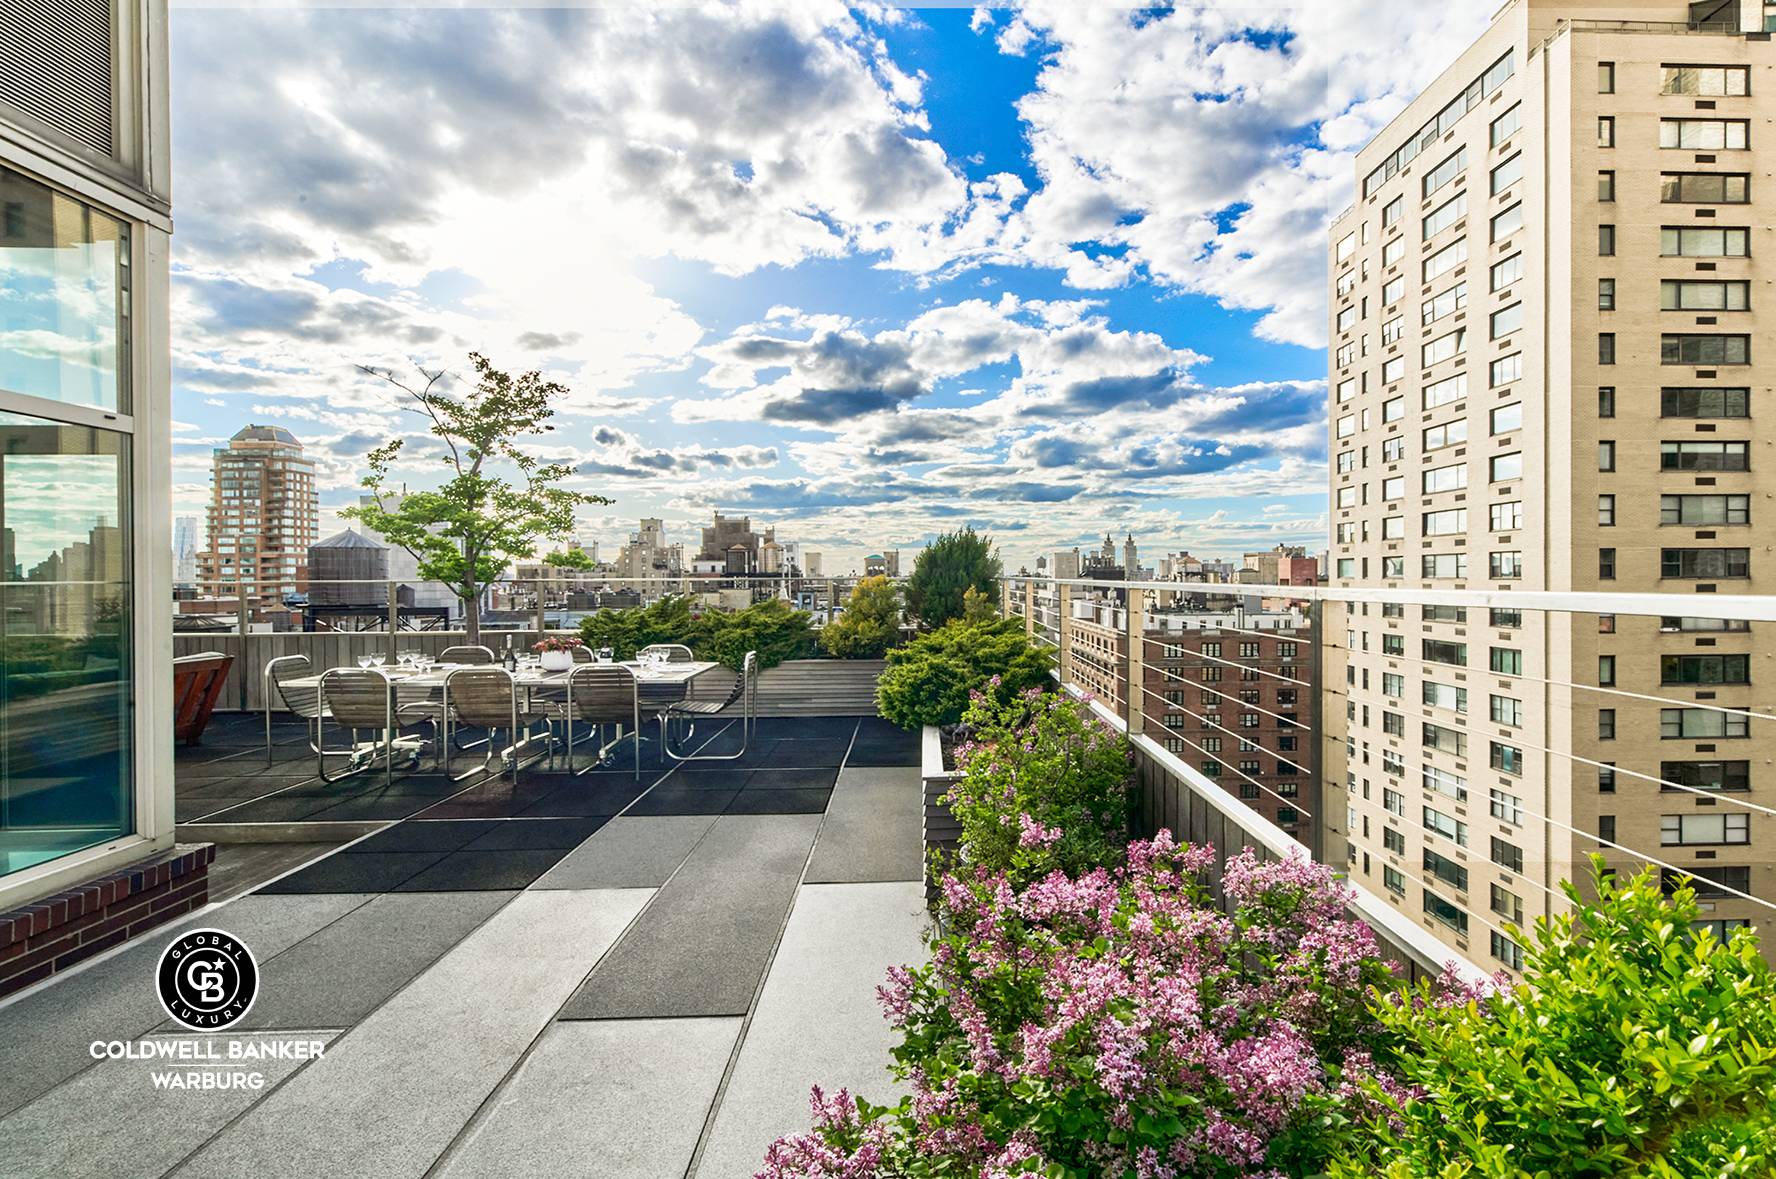 This six bedroom, 4, 775 SF condominium is a sophisticated oasis with a 2, 725 SF wraparound terrace with dramatic views in all directions, soaring high above the streets of ...